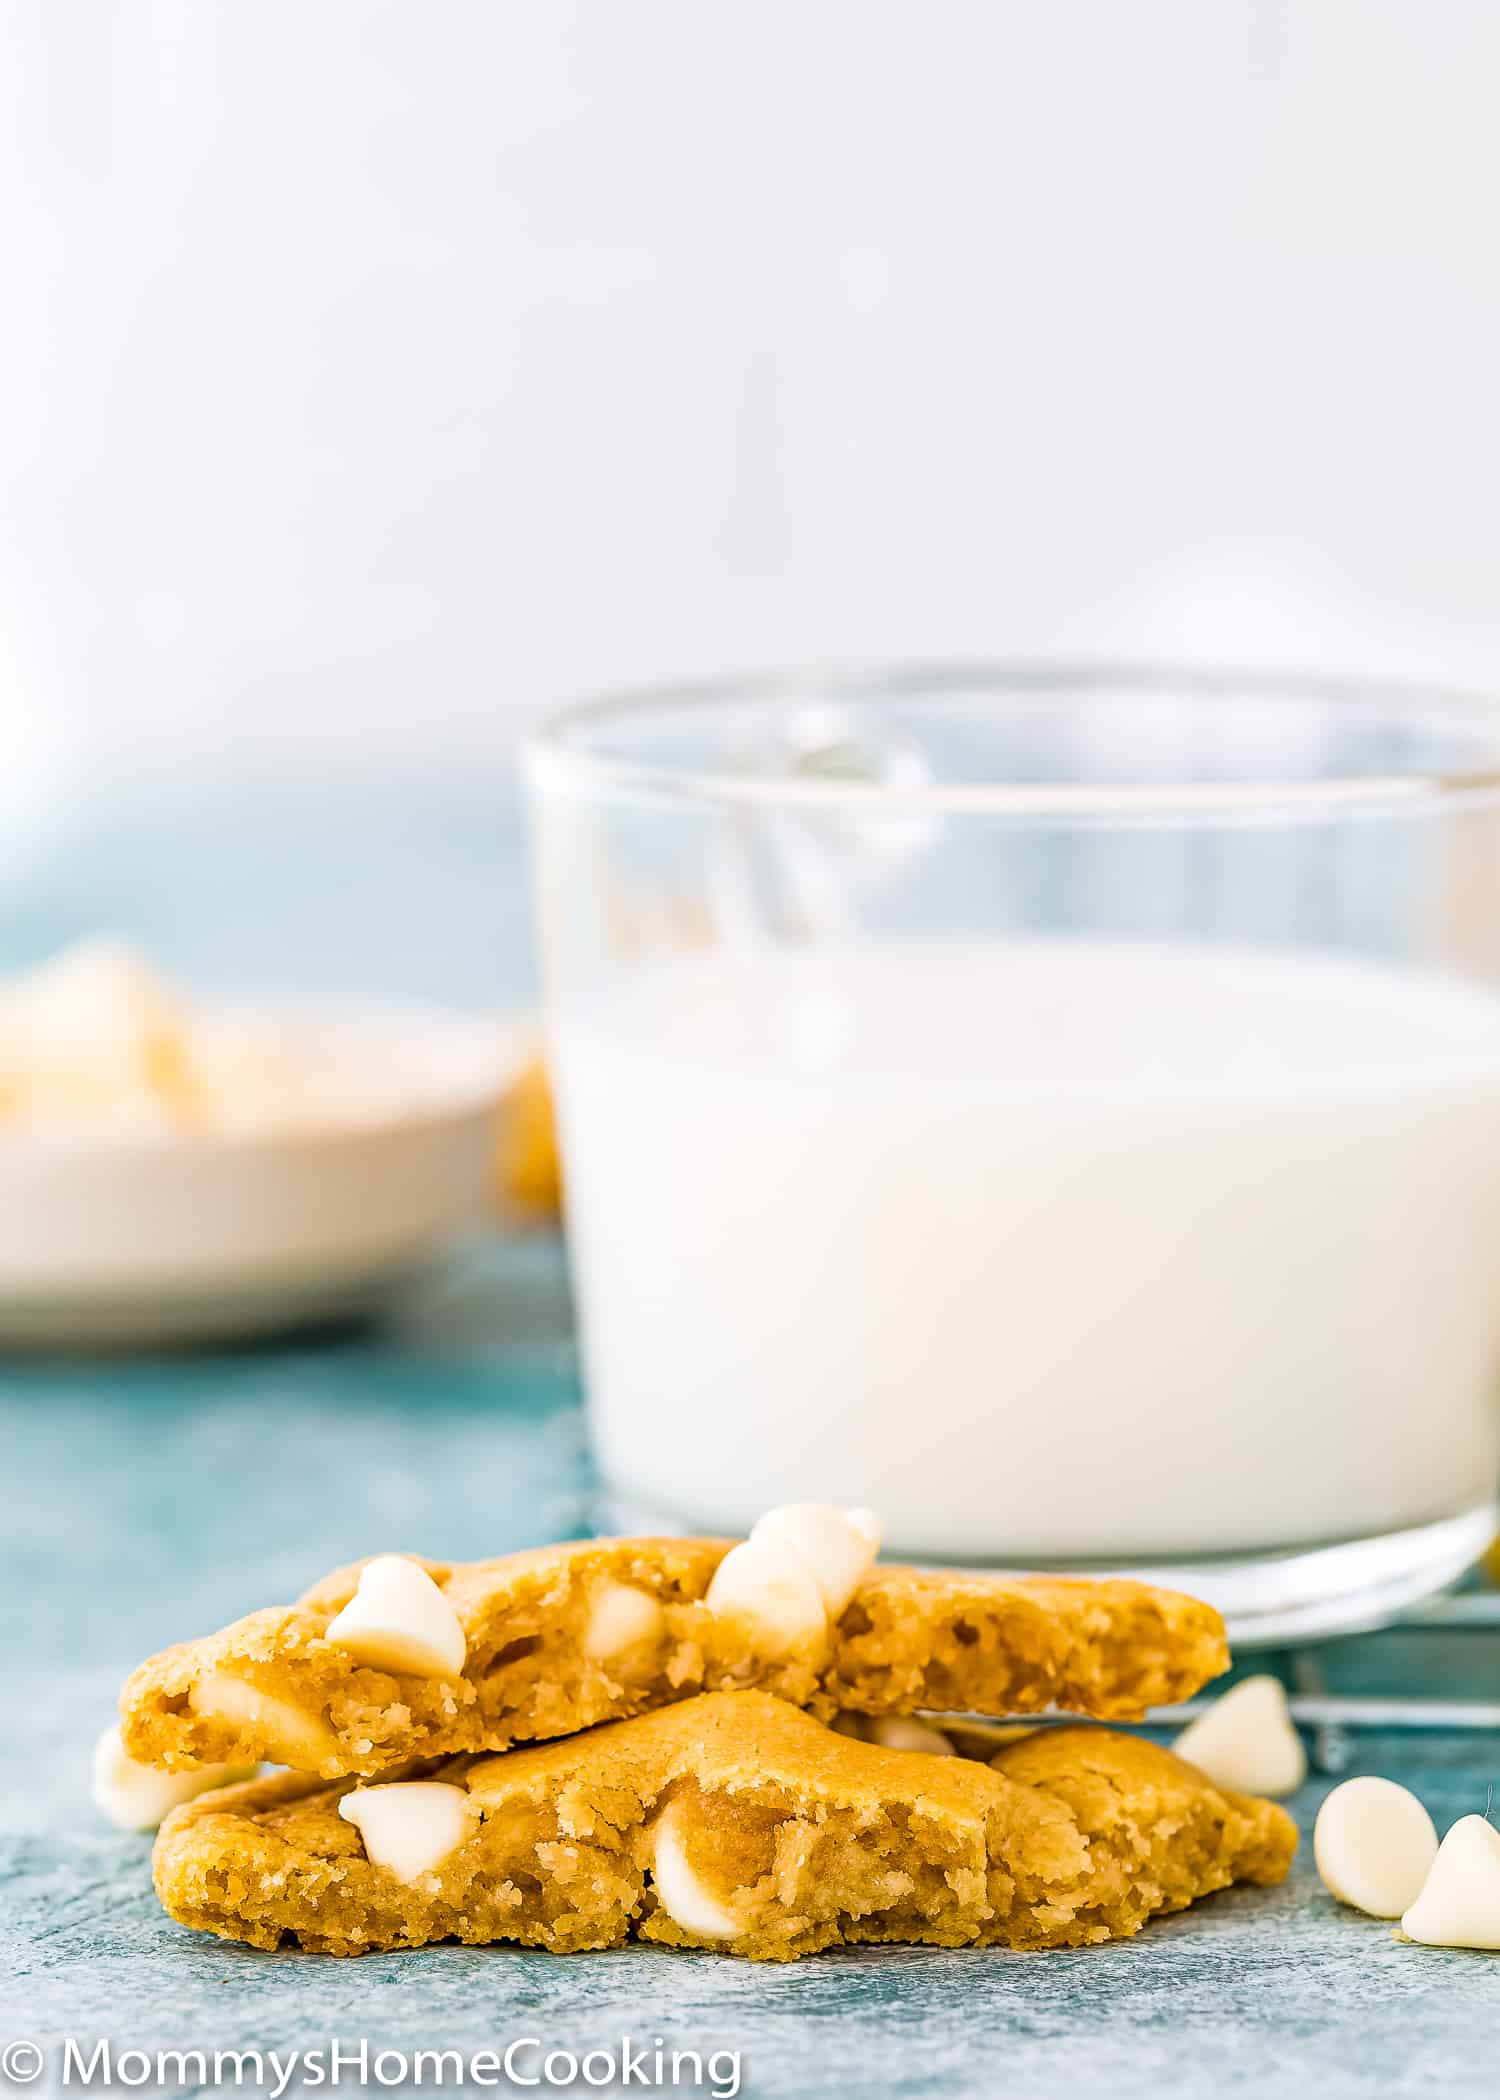 Egg-free White Chocolate Cookie next to a glass of milk